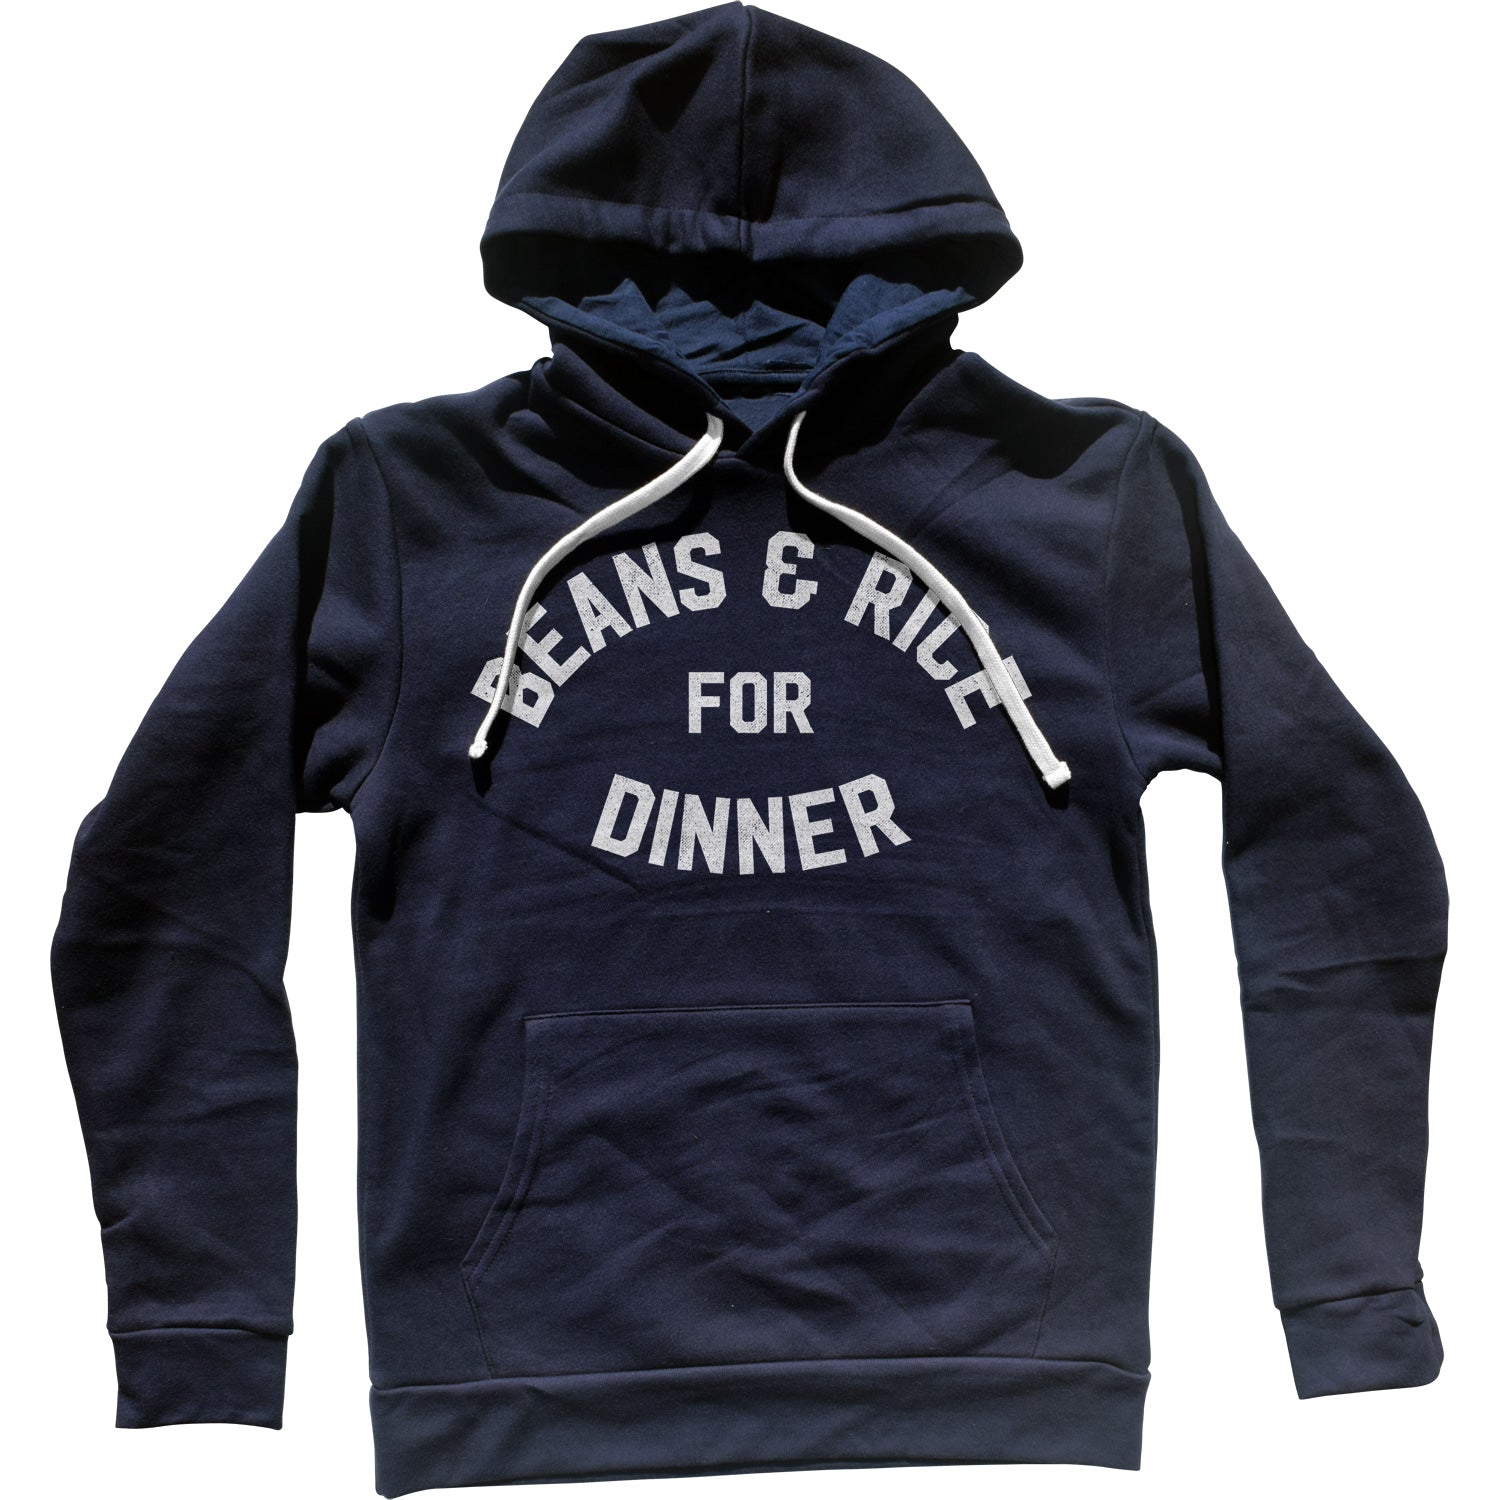 Beans and Rice For Dinner Unisex Hoodie